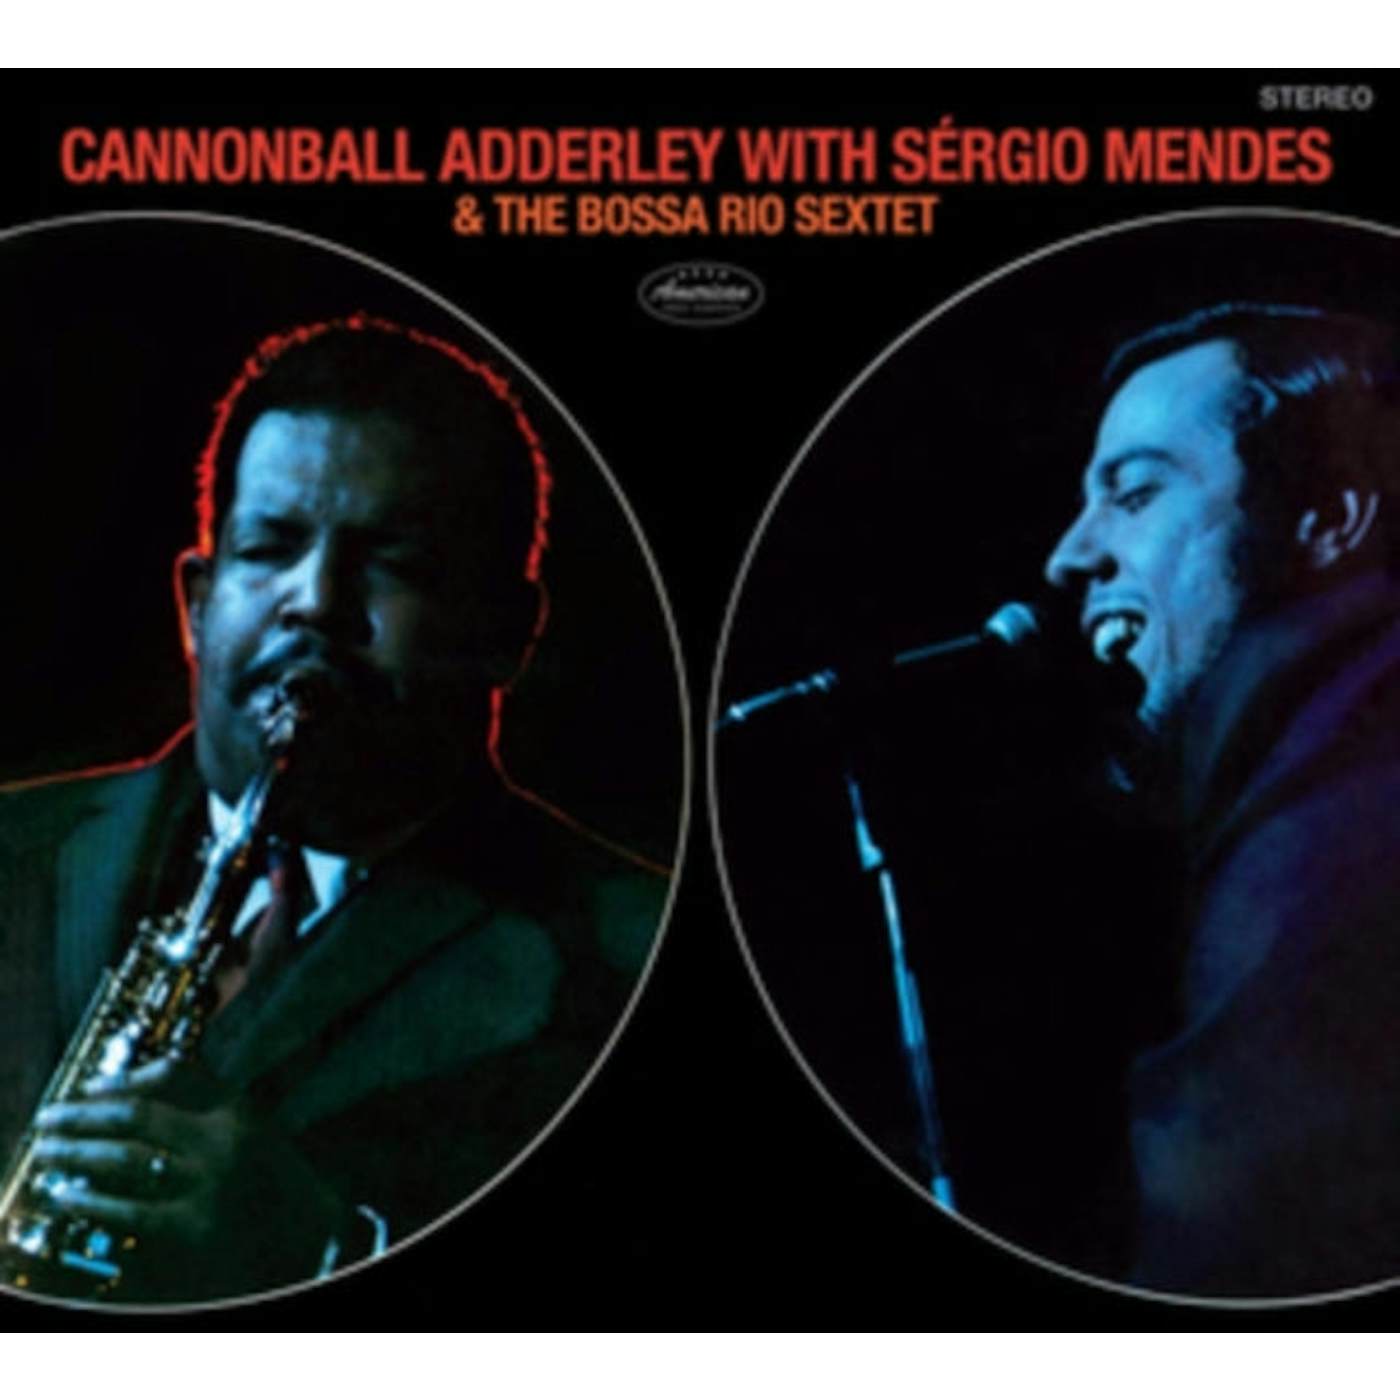 Cannonball Adderley CD - Cannonball Adderley With Sergio Mendes & The Bossa Rio Sextet (Digi)